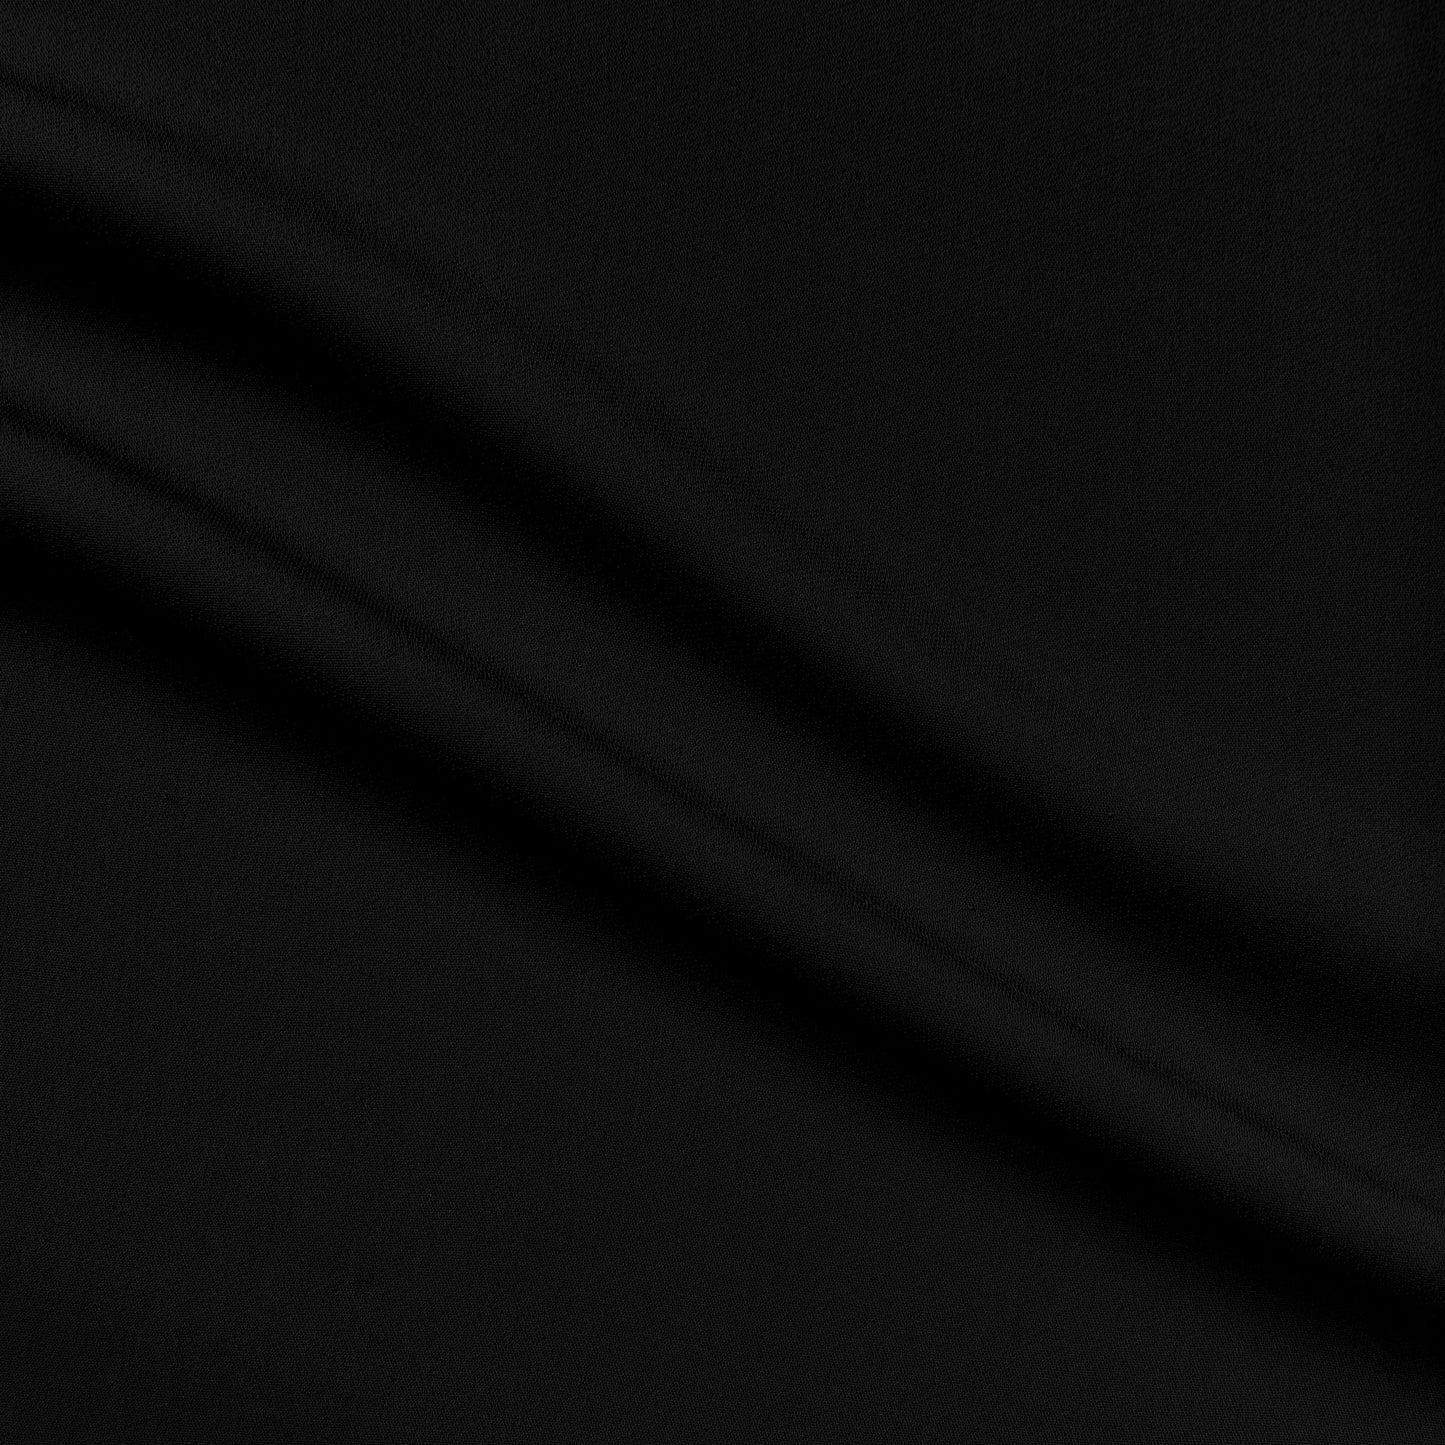 imagine presenting the black color version of a stretch mid weight viscose and lycra with a natural silk like sheen and good drape